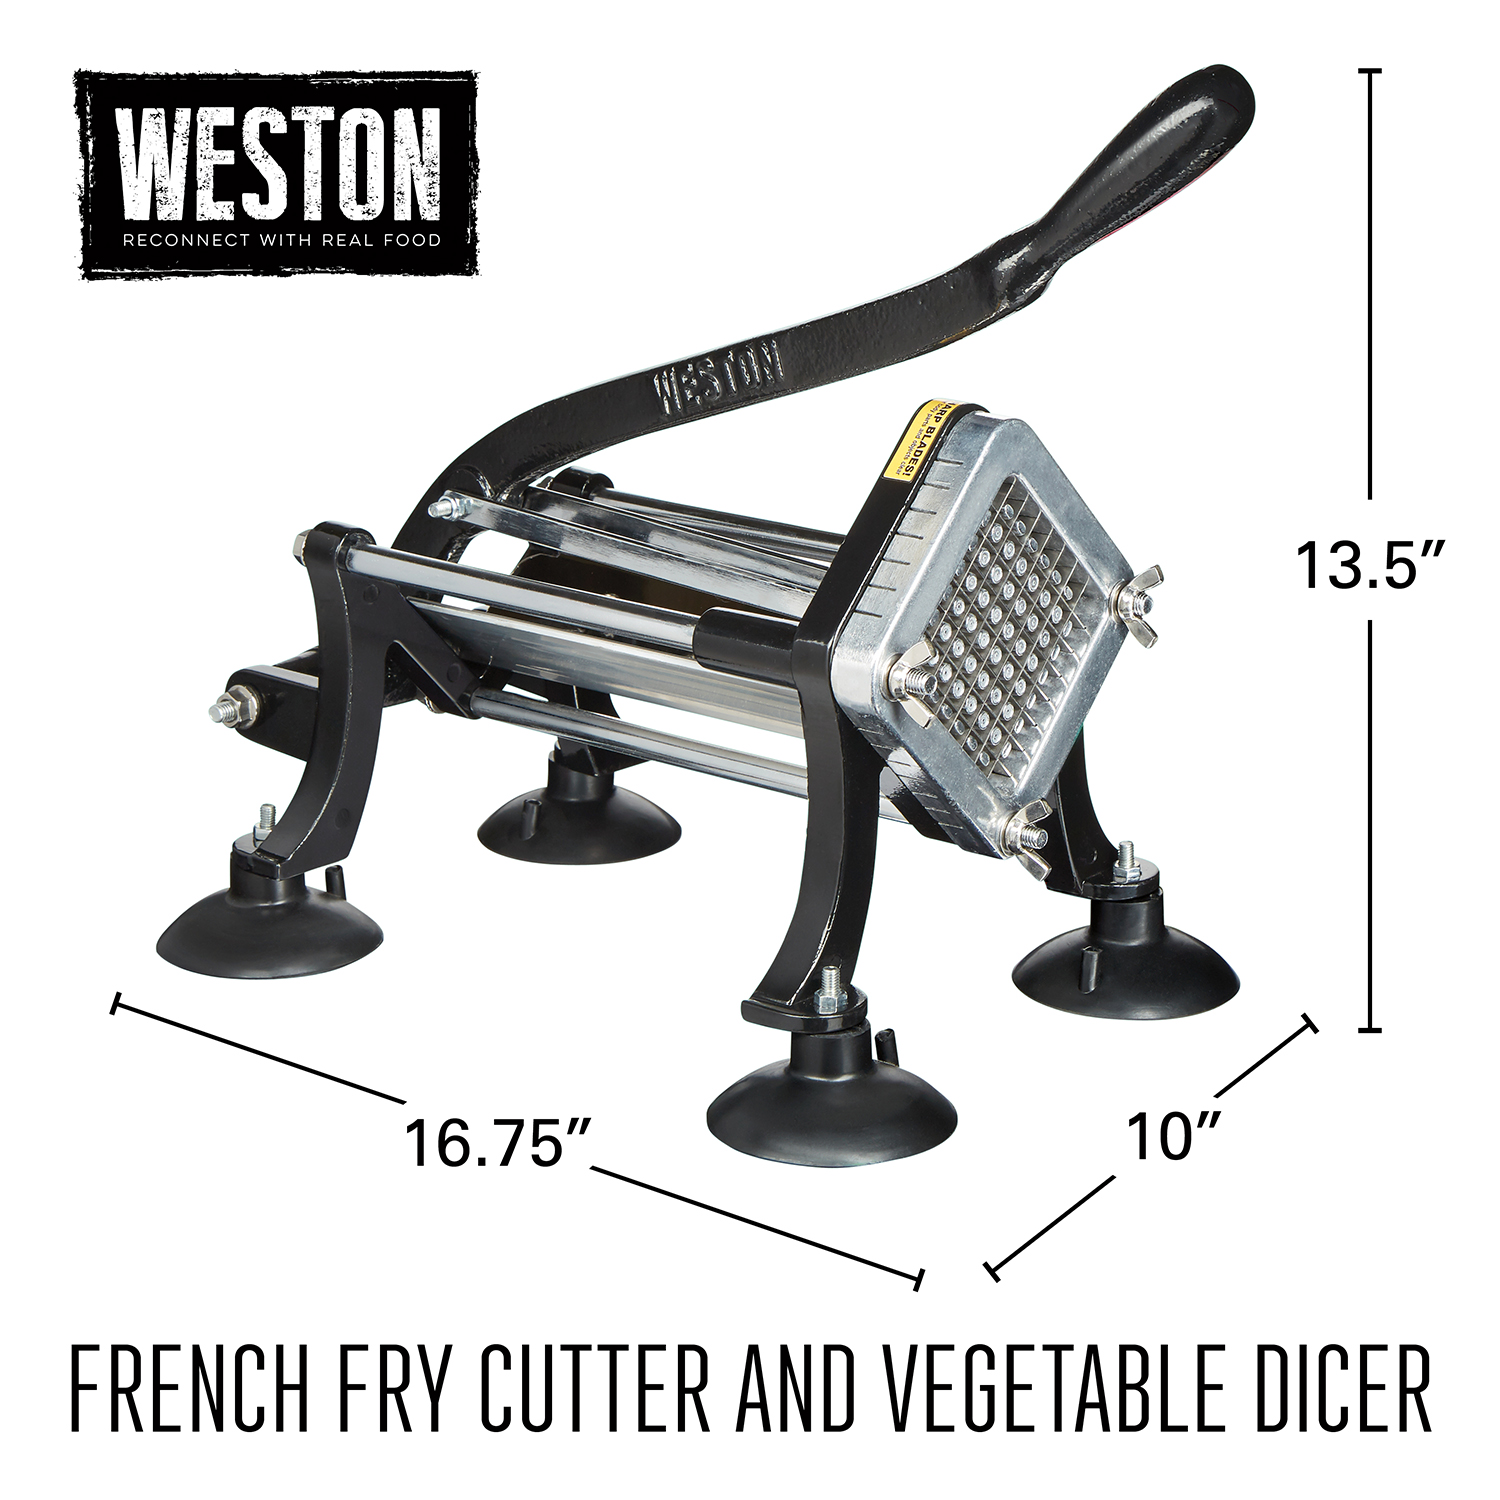 Weston French Fry Cutter & Vegetable Dicer 36-3301-W Missing 1/2 in. Blade